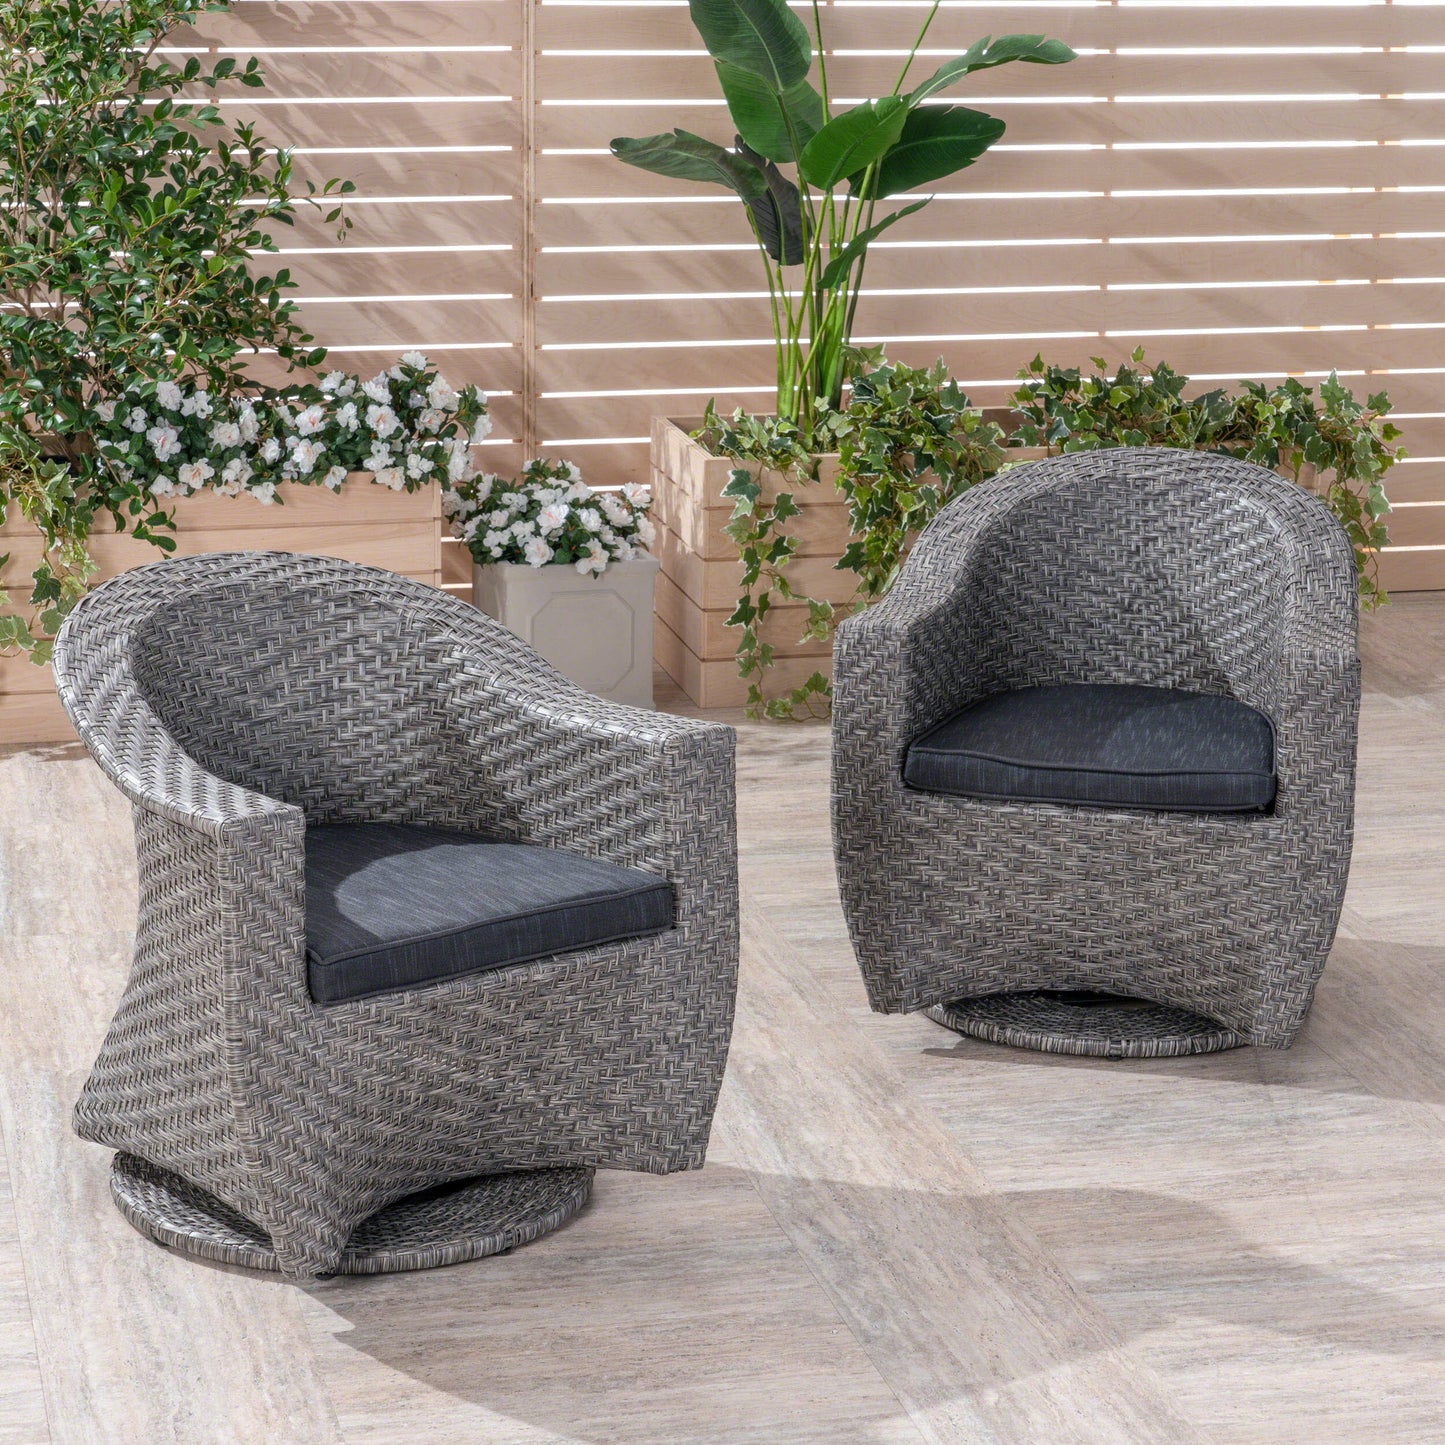 Larchmont Patio Swivel Chairs, Wicker with Outdoor Cushions, Mixed Black and Dark Gray